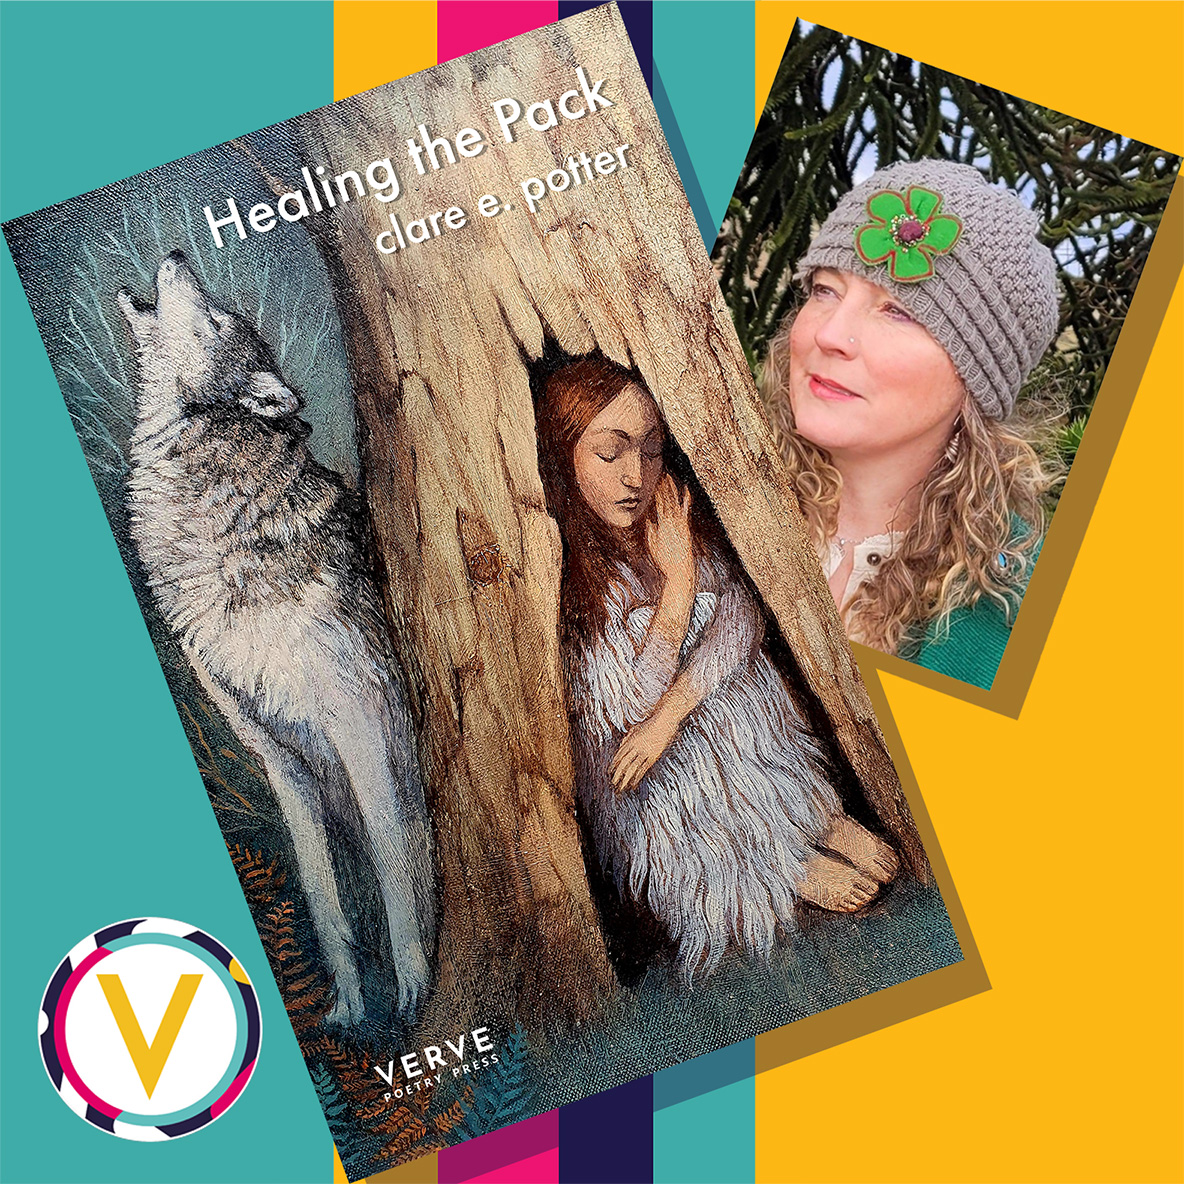 HAPPY PUBLICATION DAY to the lovely @clare_potter who's wonderful collection #HealingThePack is officially published today! 'A moving and beautiful collection' (@ZoeBrigley) of family, landscape, suffering and strength. tinyurl.com/2277dm76